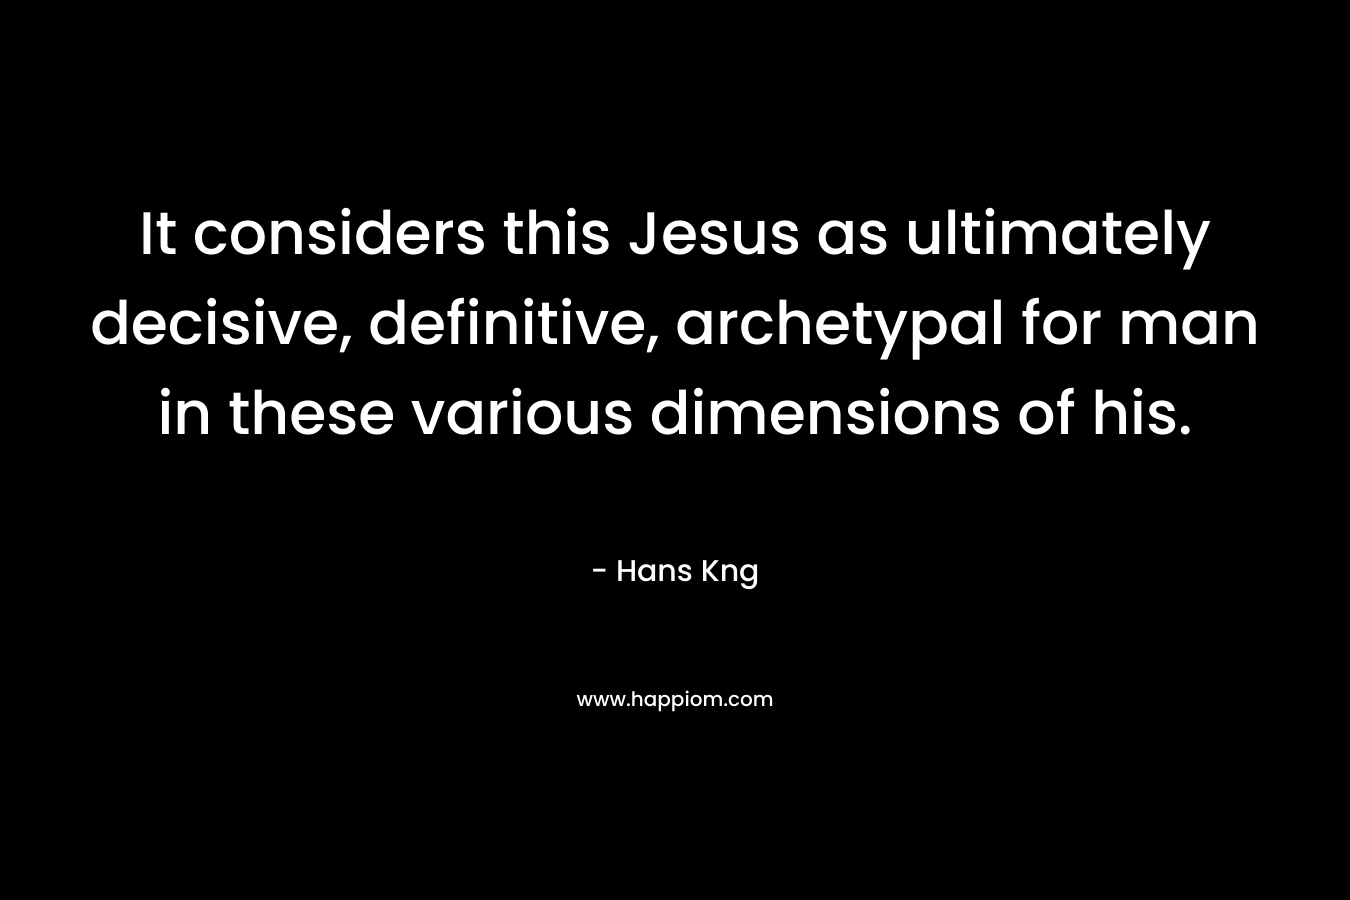 It considers this Jesus as ultimately decisive, definitive, archetypal for man in these various dimensions of his.